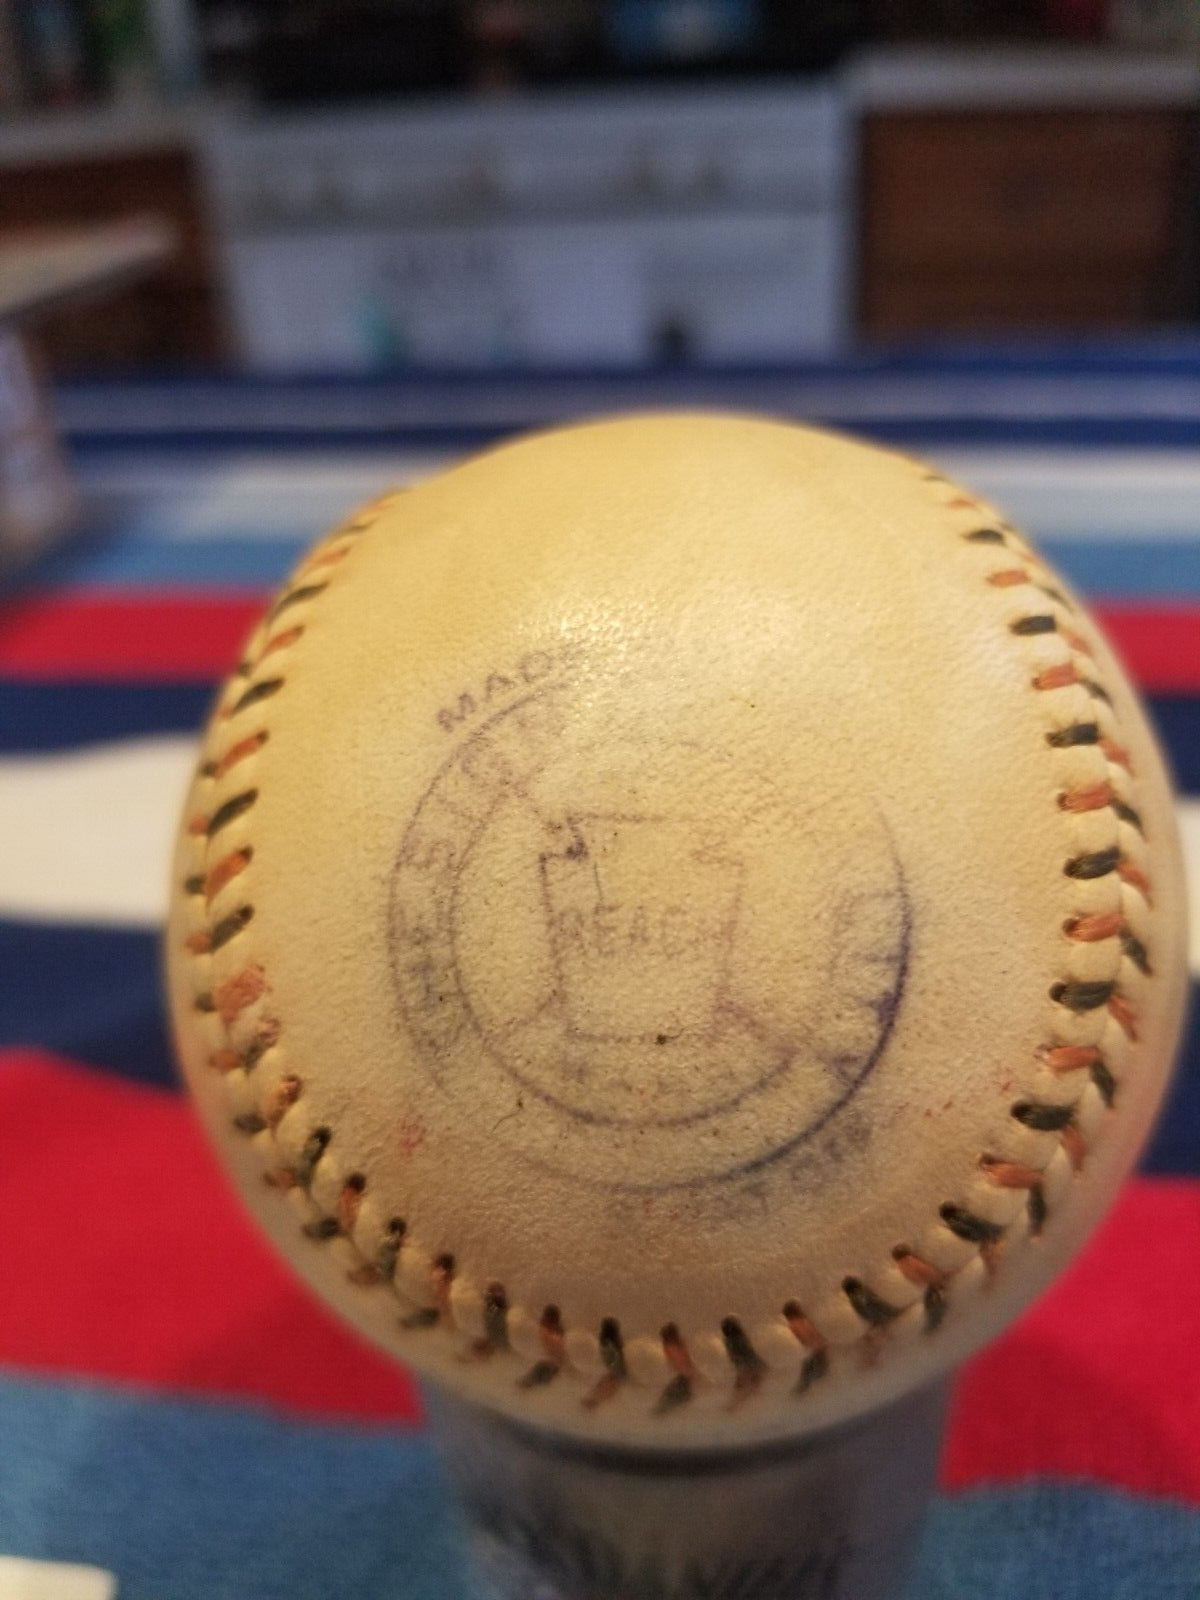 AMERICAN LEAGUE REACH BASEBALL JOHNSON WITH THE RED AND BLUE STITCHING {REPLICA}